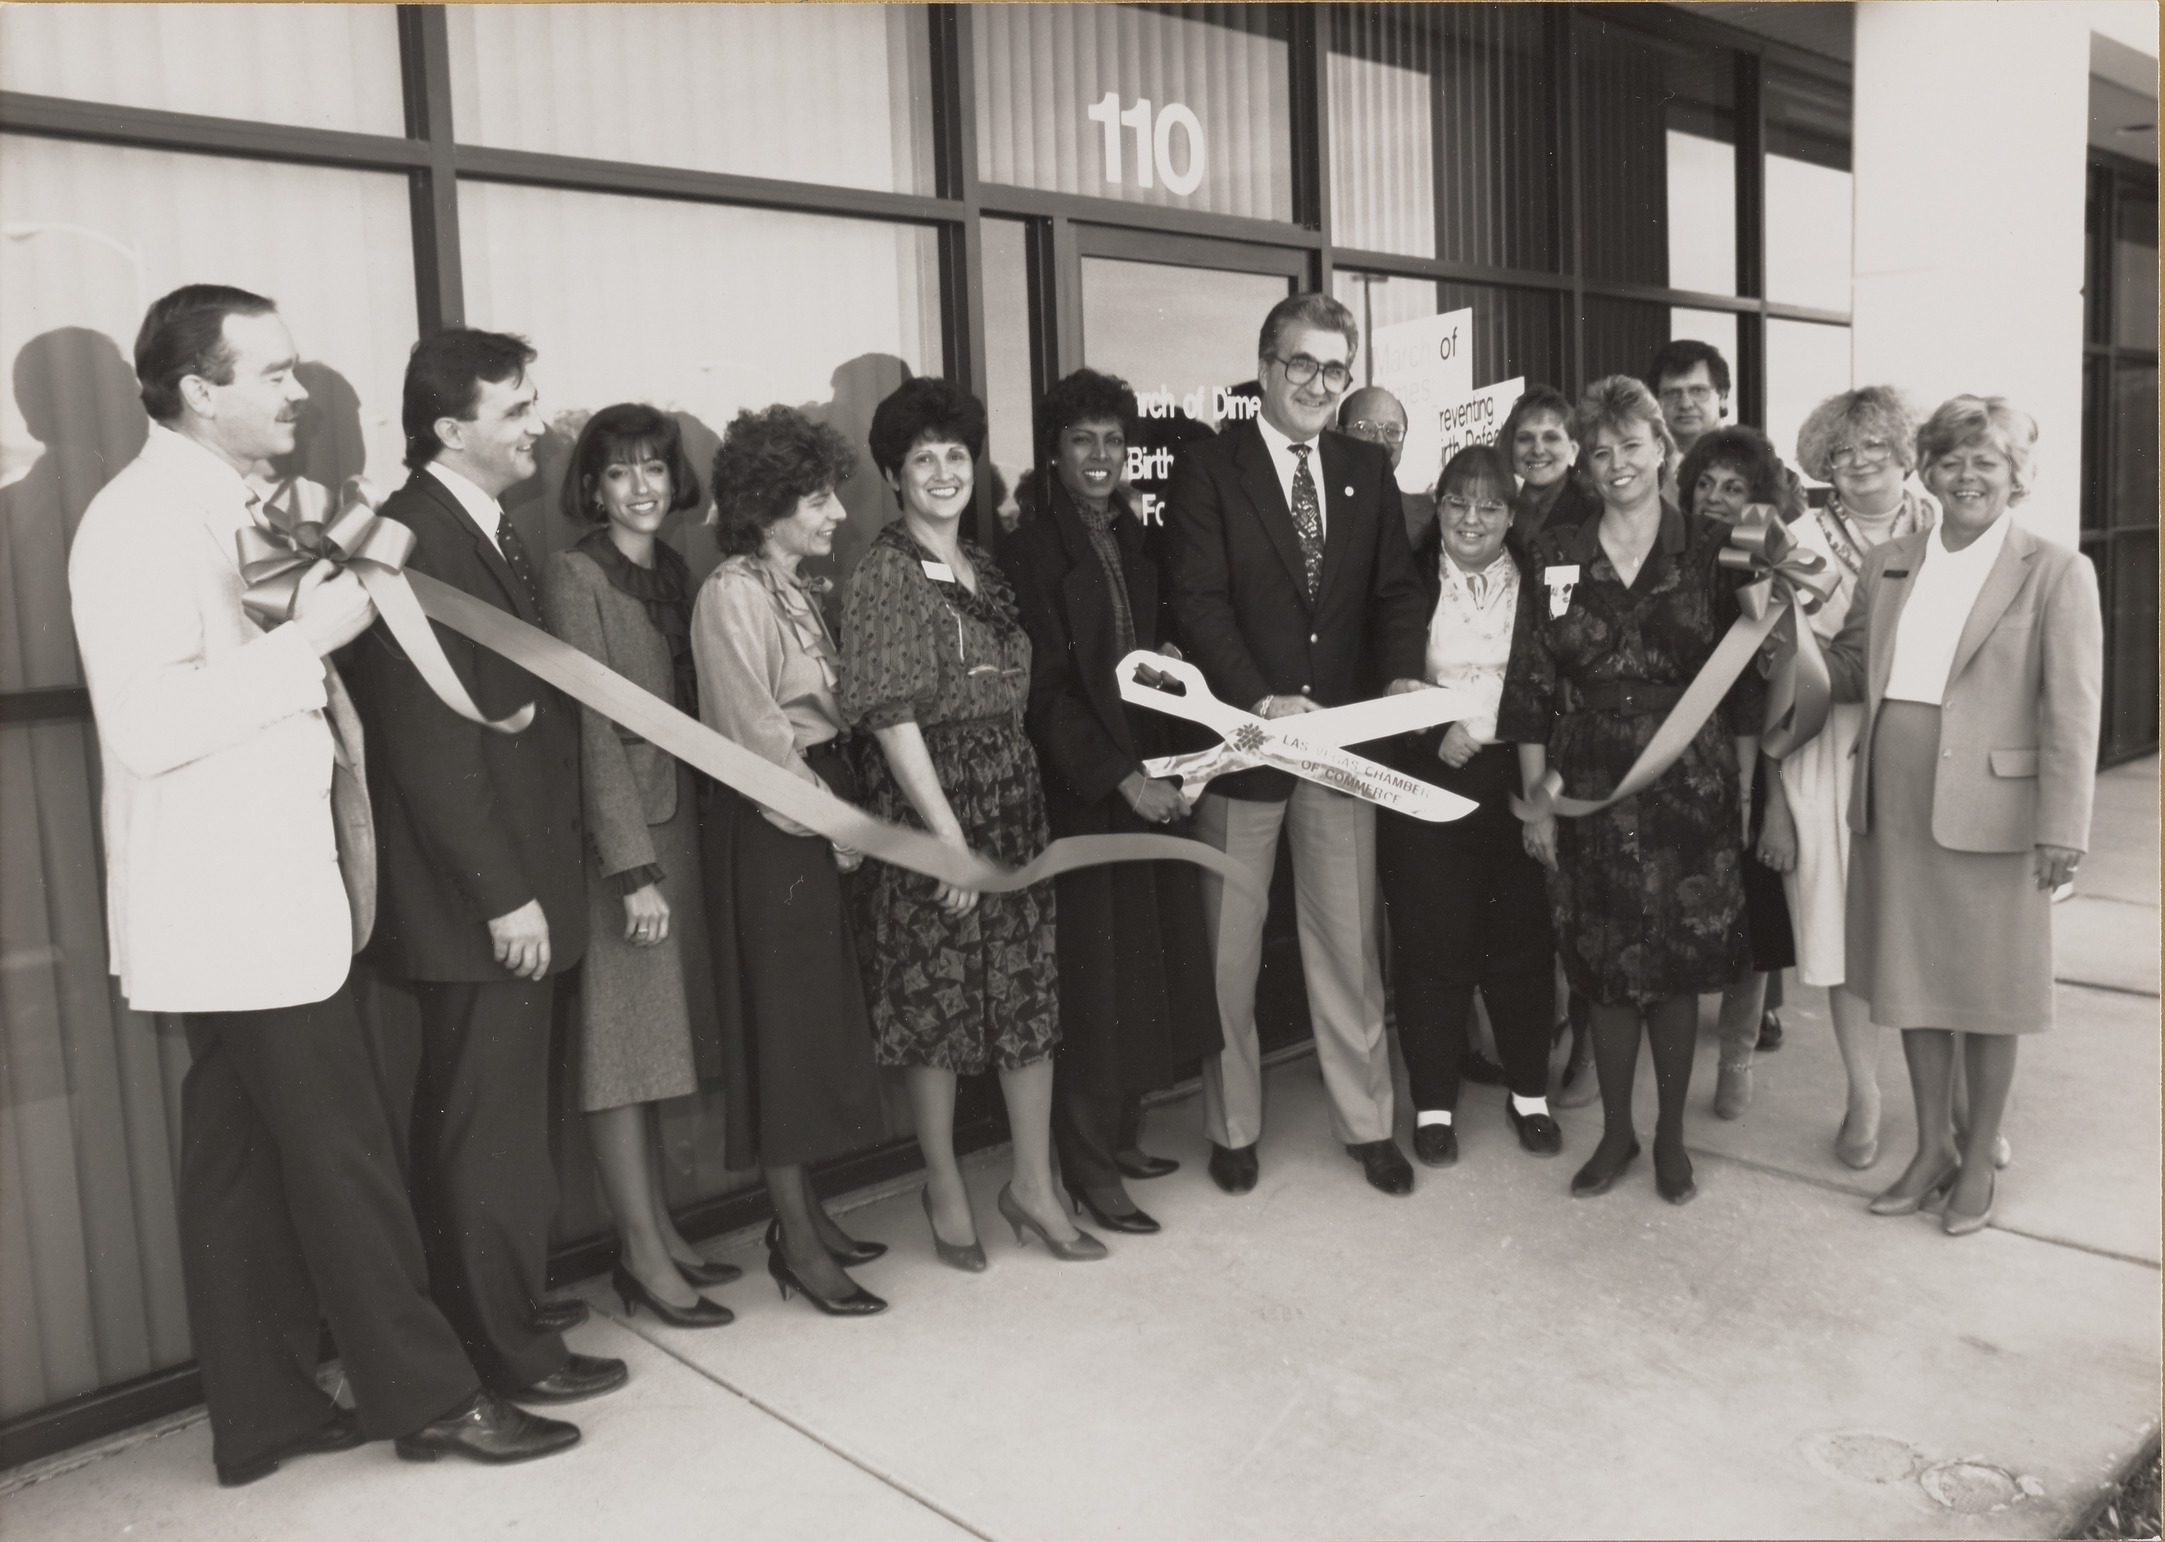 Photograph of ribbon cutting for March of Dimes foundation building